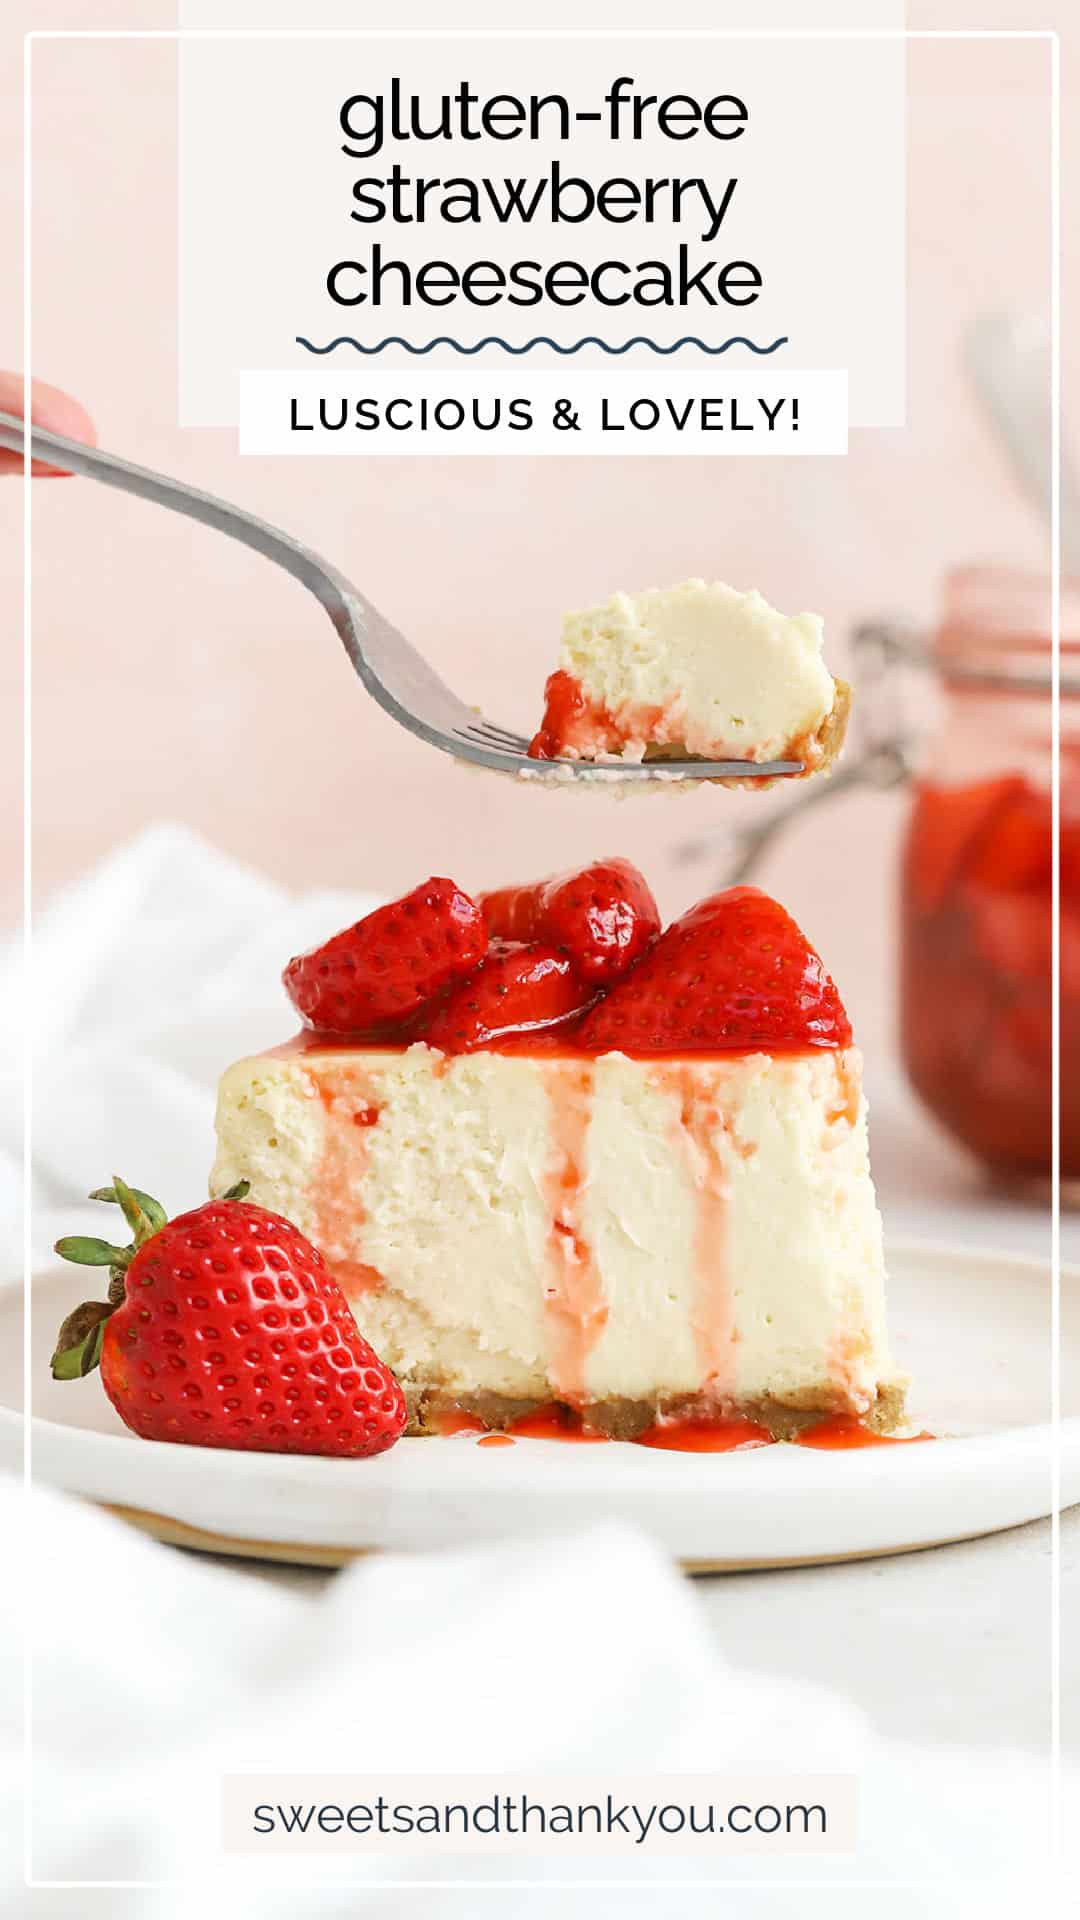 Our Gluten-Free Strawberry Cheesecake recipe is a total showstopper! Luscious glute-free cheesecake with fresh strawberry topping. It's as yummy as it looks! / strawberry cheesecake / gluten-free cheesecake recipe / strawberry topping for cheesecake / gluten-free cheesecake with strawberry sauce / 